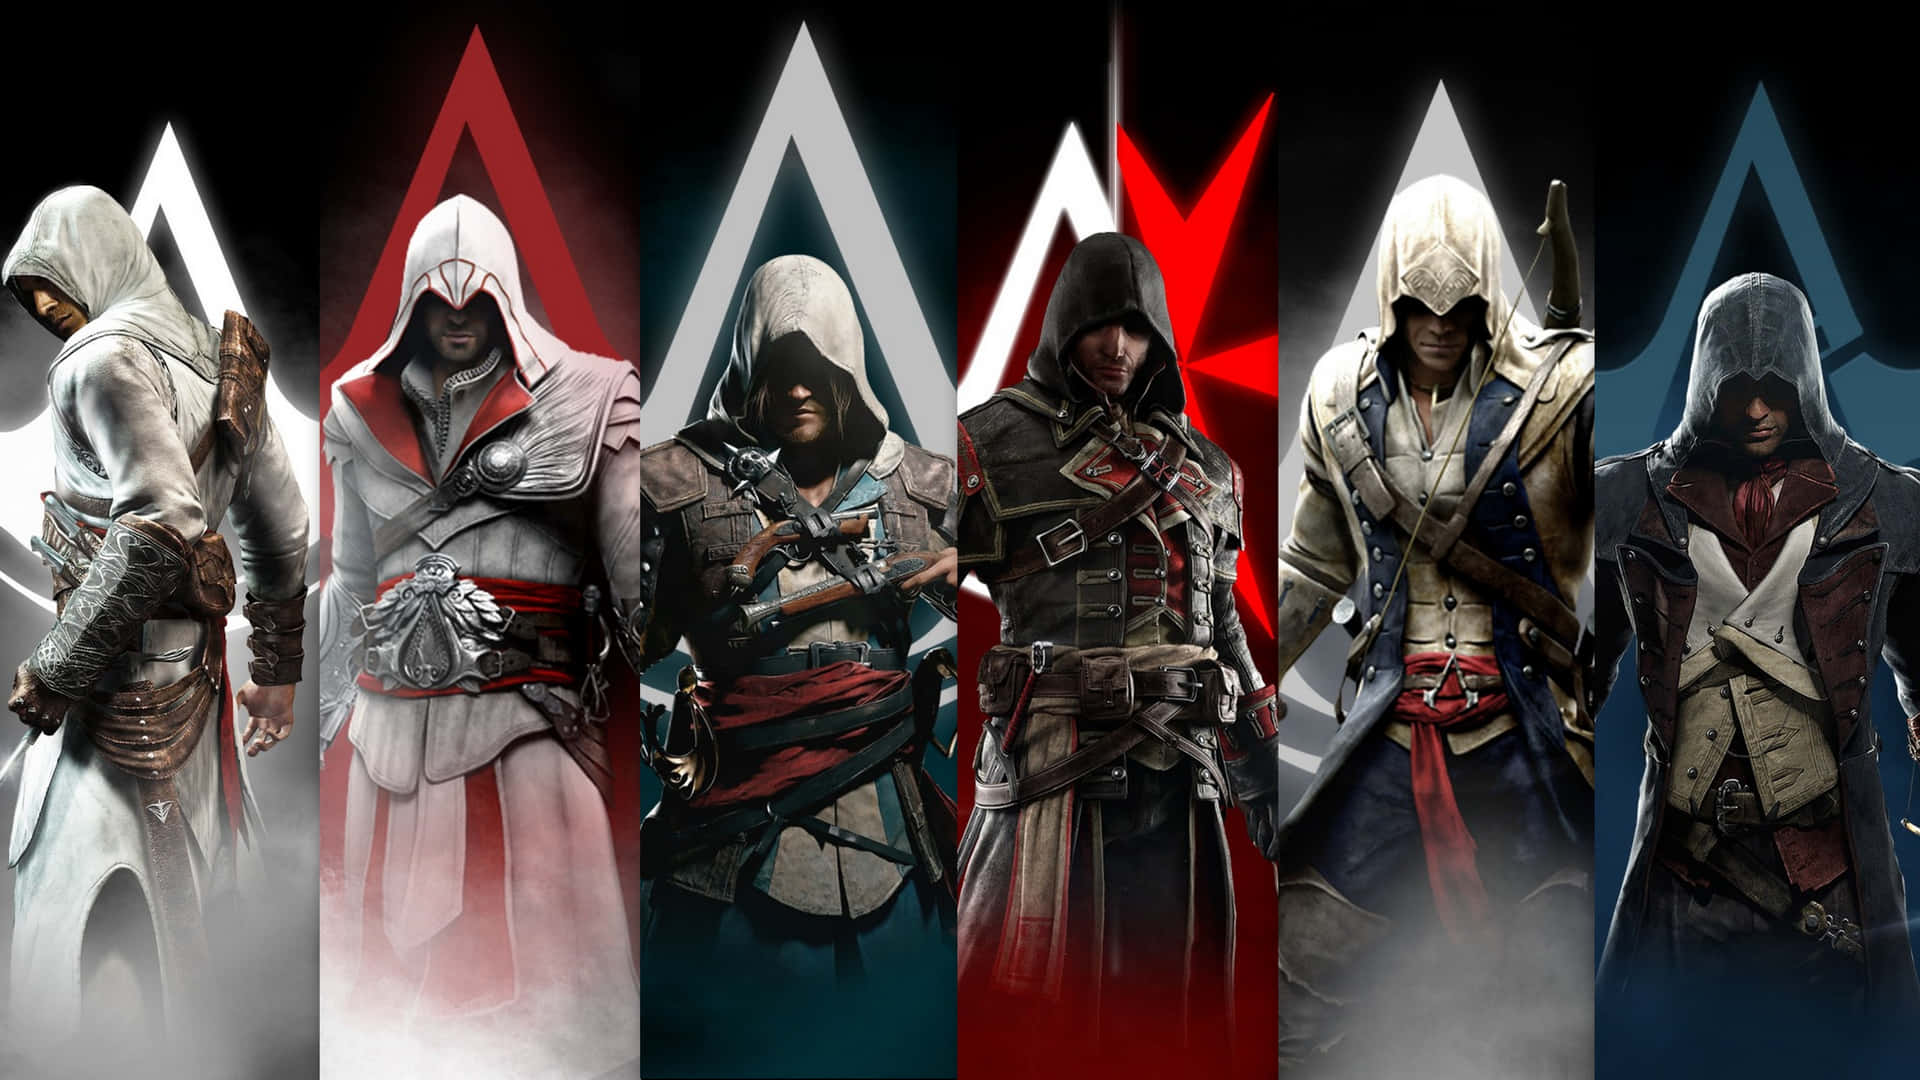 Shay Cormac standing tall as a skilled Assassin-turned-Templar Wallpaper